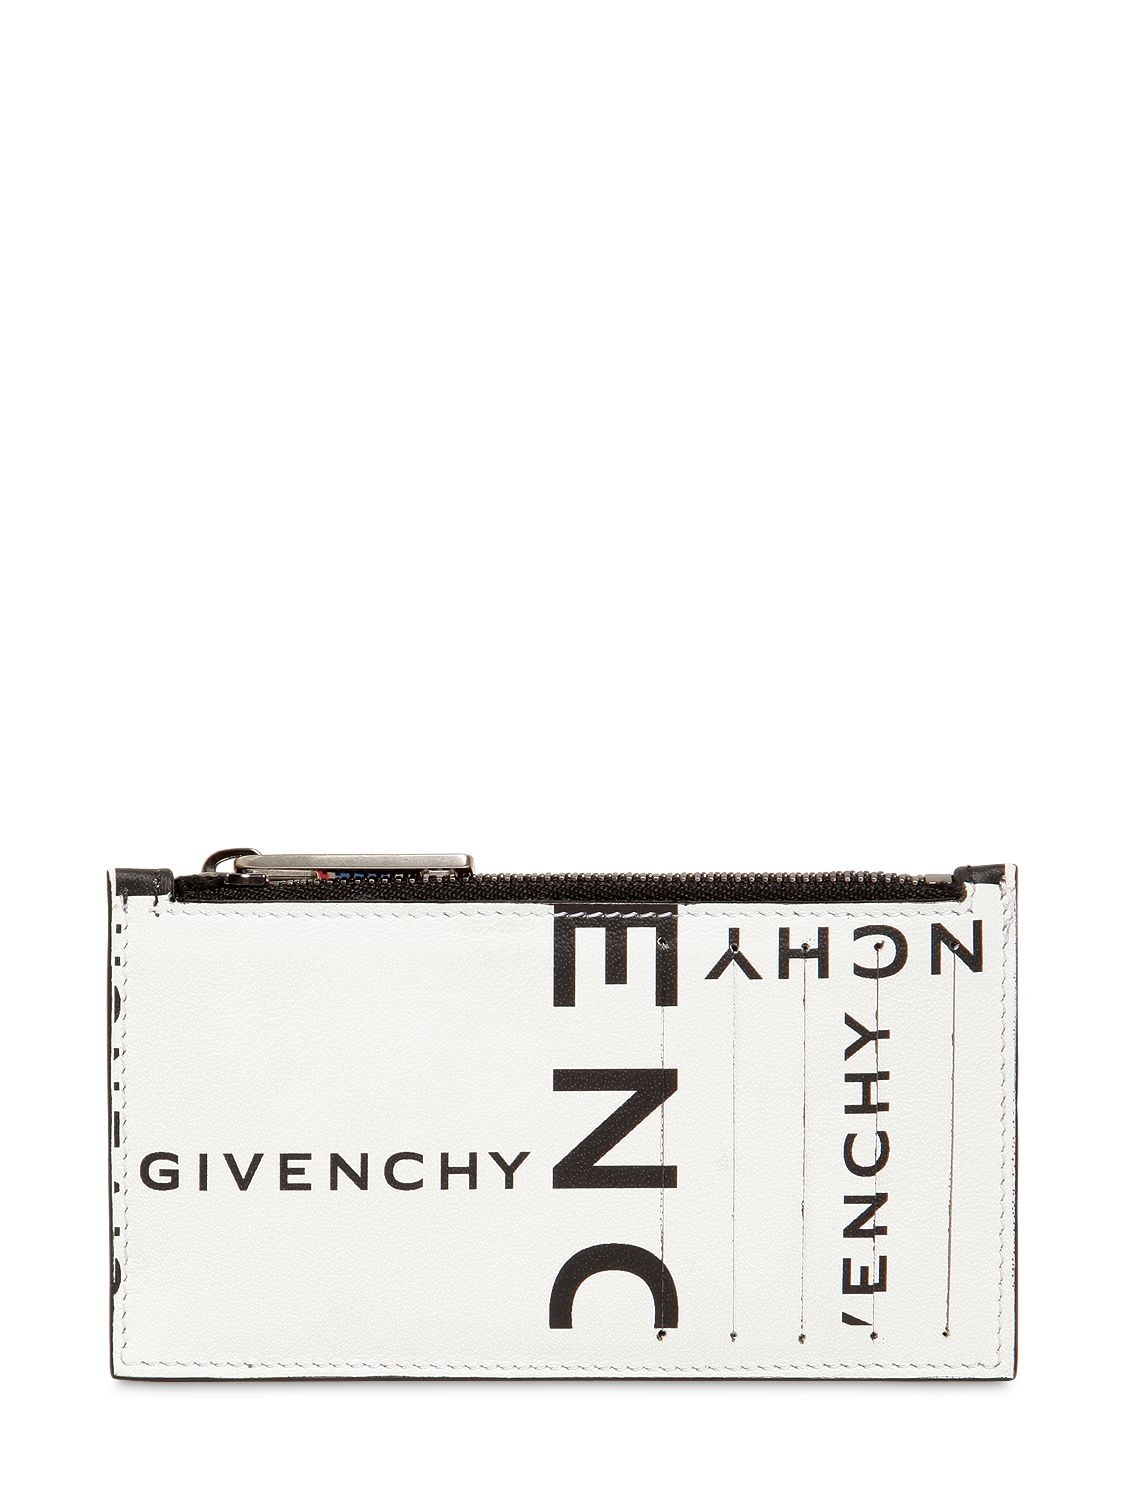 GIVENCHY LOGO PRINTED LEATHER ZIP WALLET,70IL4G003-MDA00